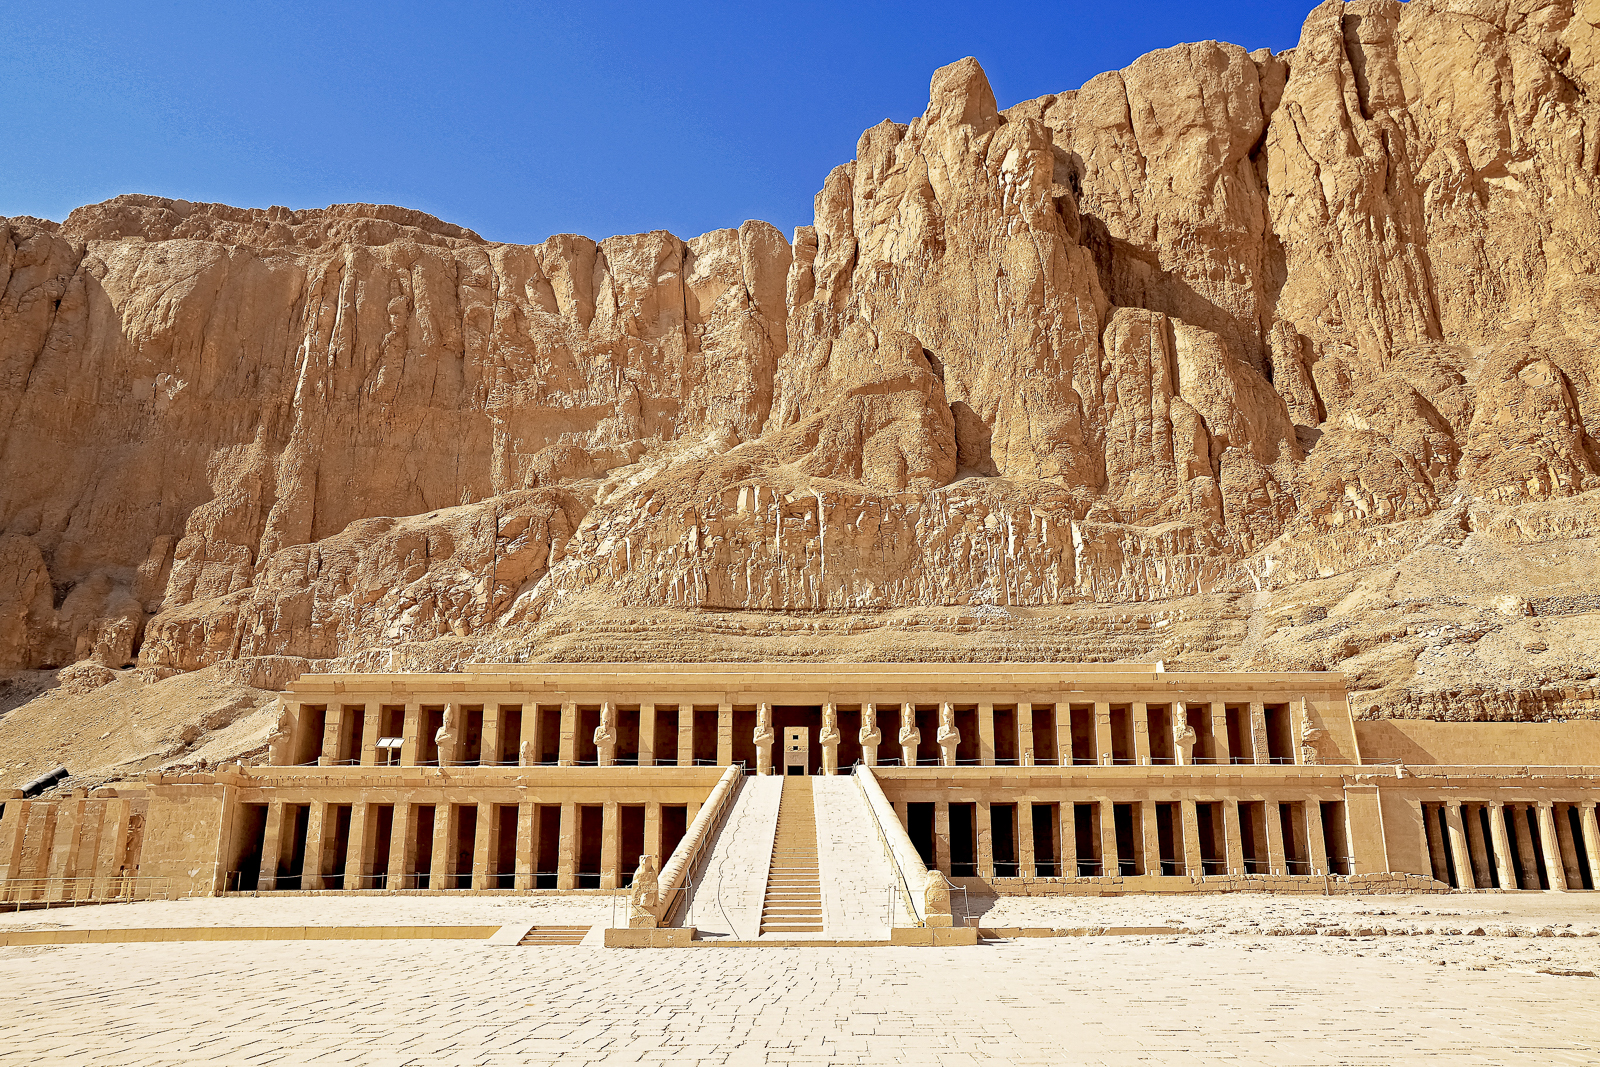 Exterior of the Valley of the Queens in Egypt